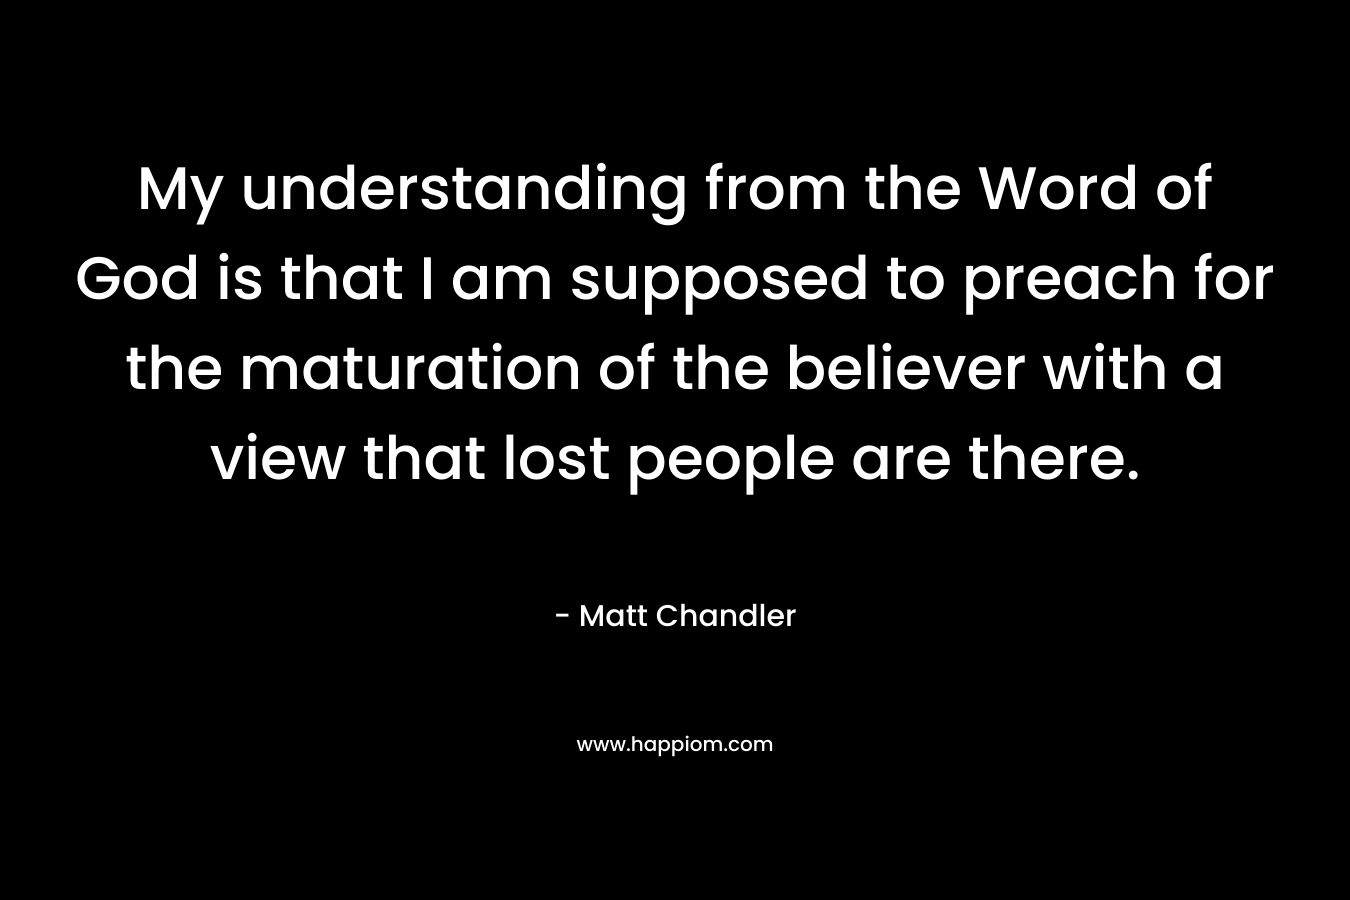 My understanding from the Word of God is that I am supposed to preach for the maturation of the believer with a view that lost people are there. – Matt      Chandler